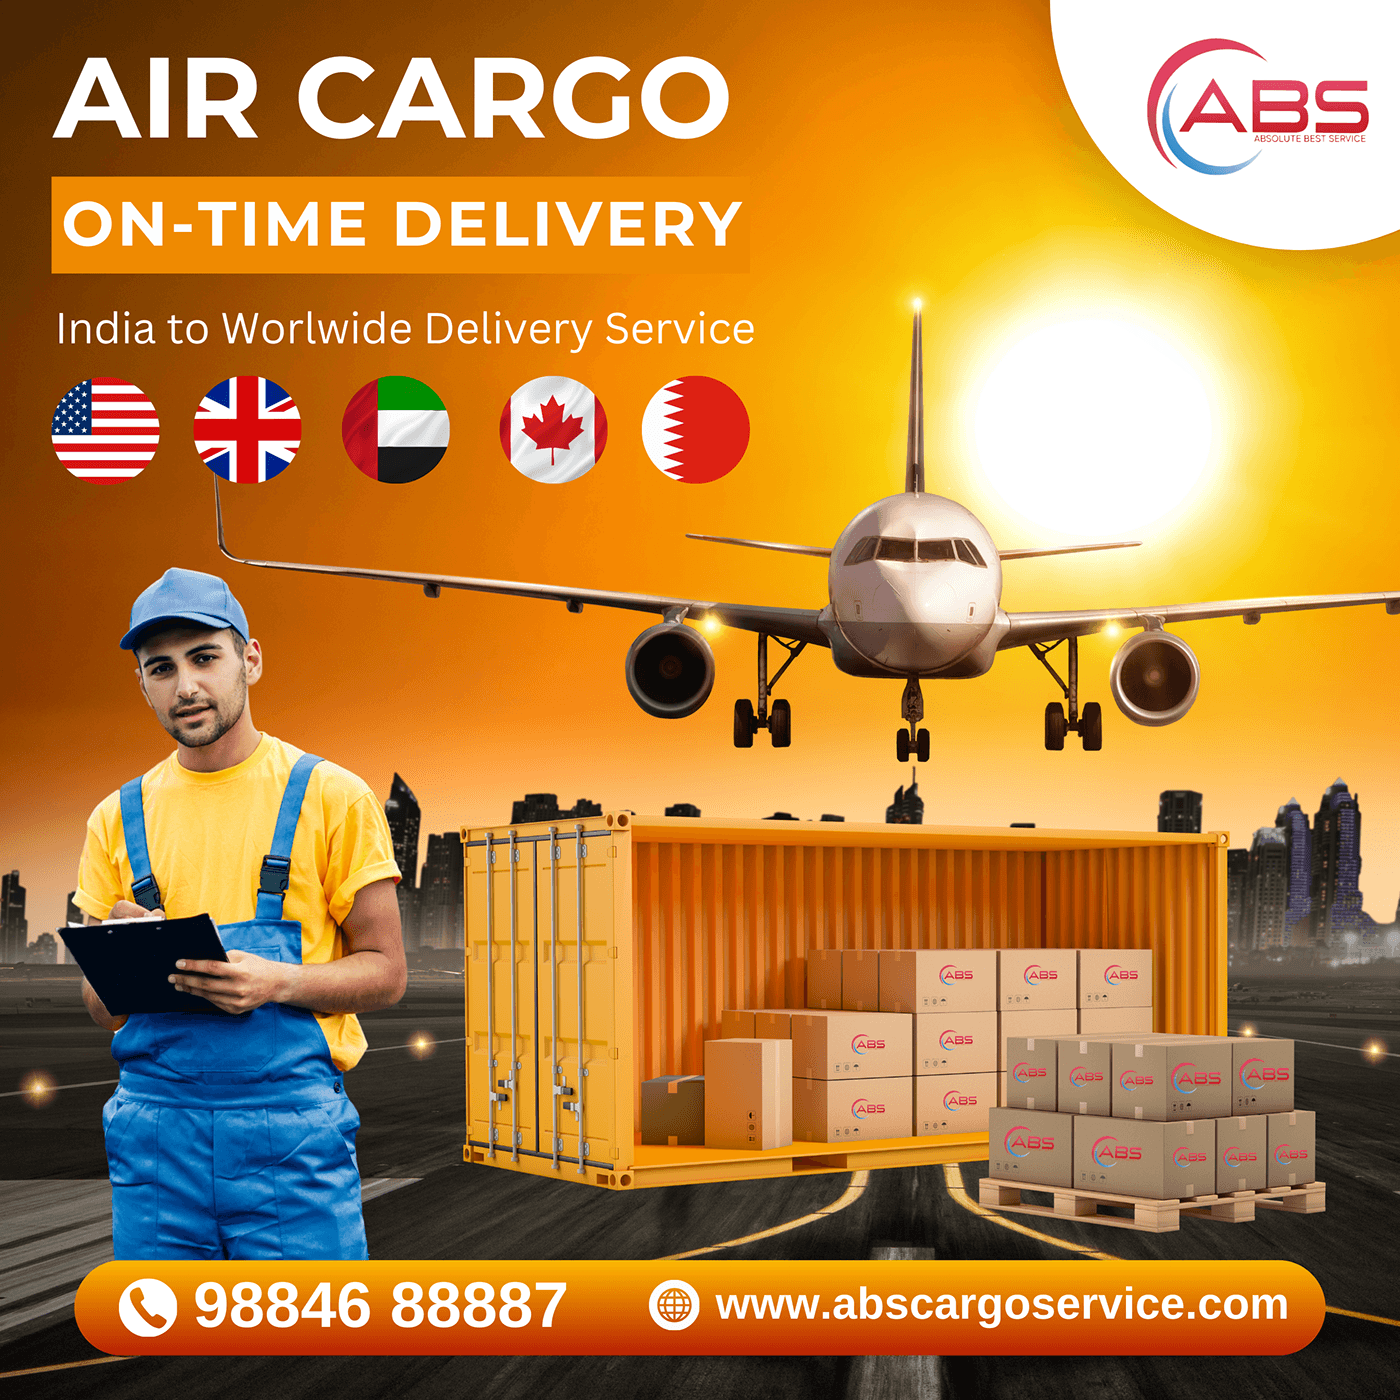 abs couriers delivery service Advertising  abs couries chennai courier service international express Parcel delivery